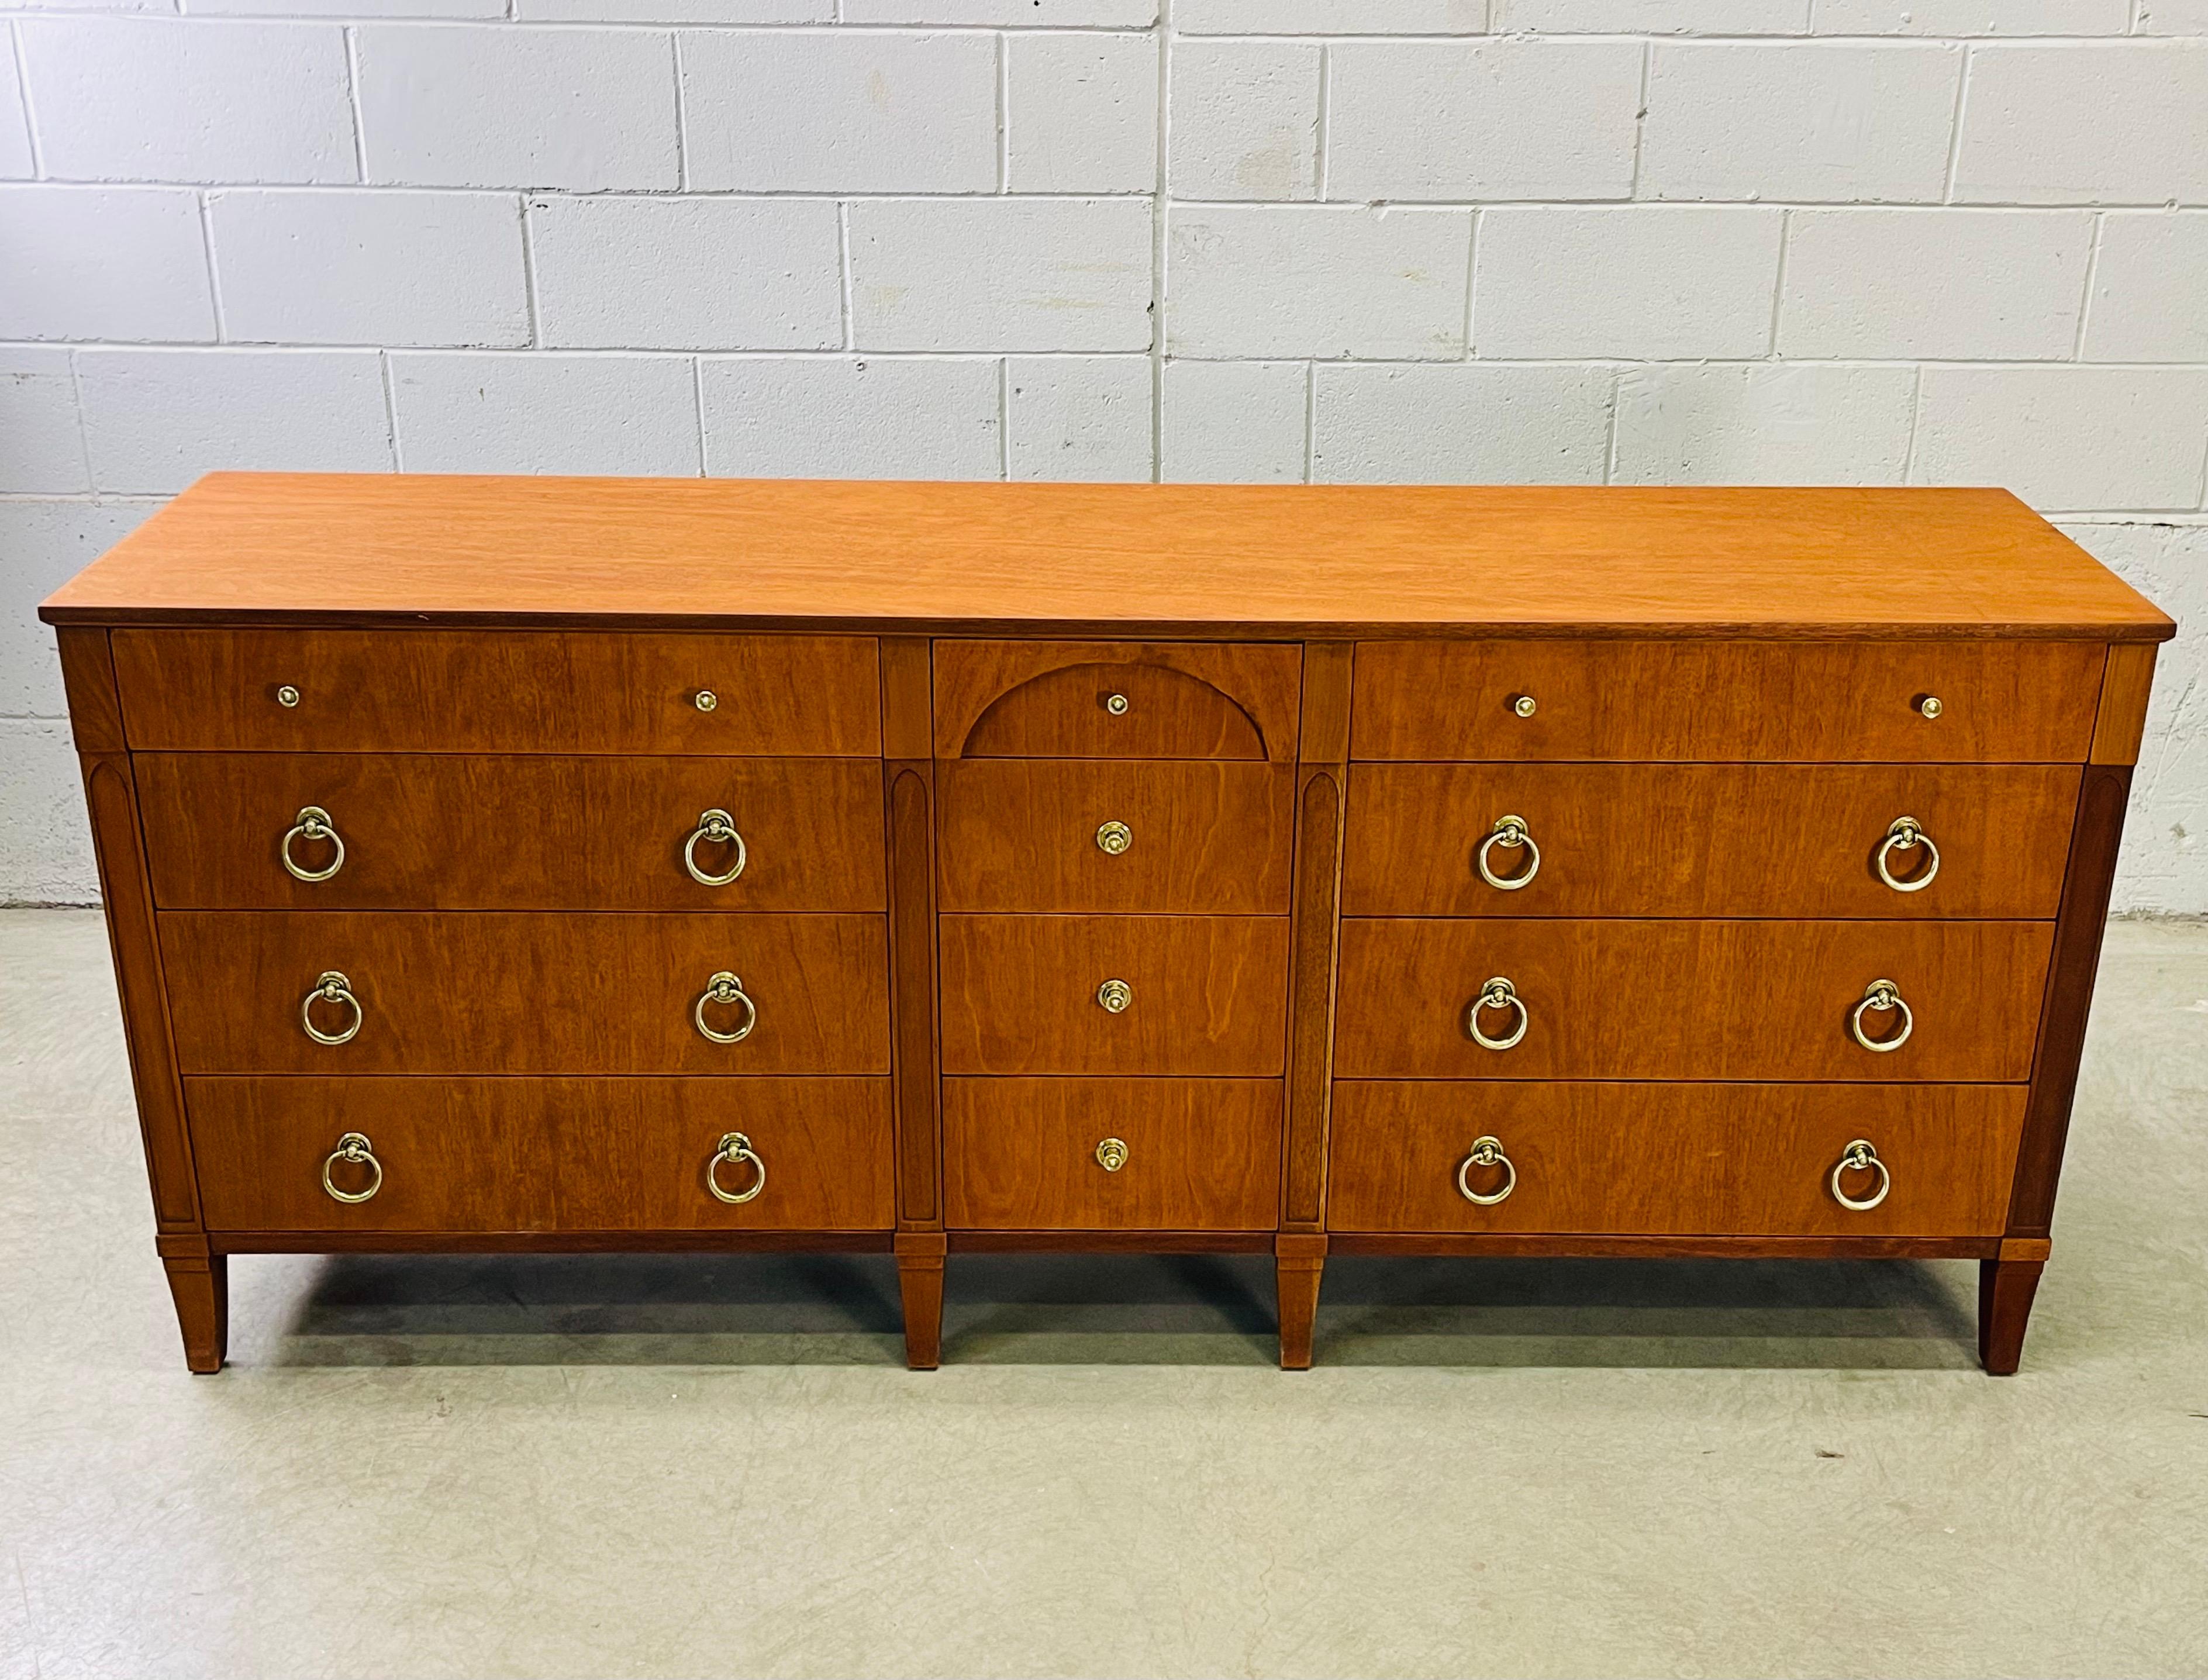 Vintage 1960s cherry wood twelve drawer low dresser with an arch design by Henredon Furniture Company. The dresser has round brass pulls. The drawers are 3-5.5”H for ample storage. The dresser is in newly refinished condition. Marked.